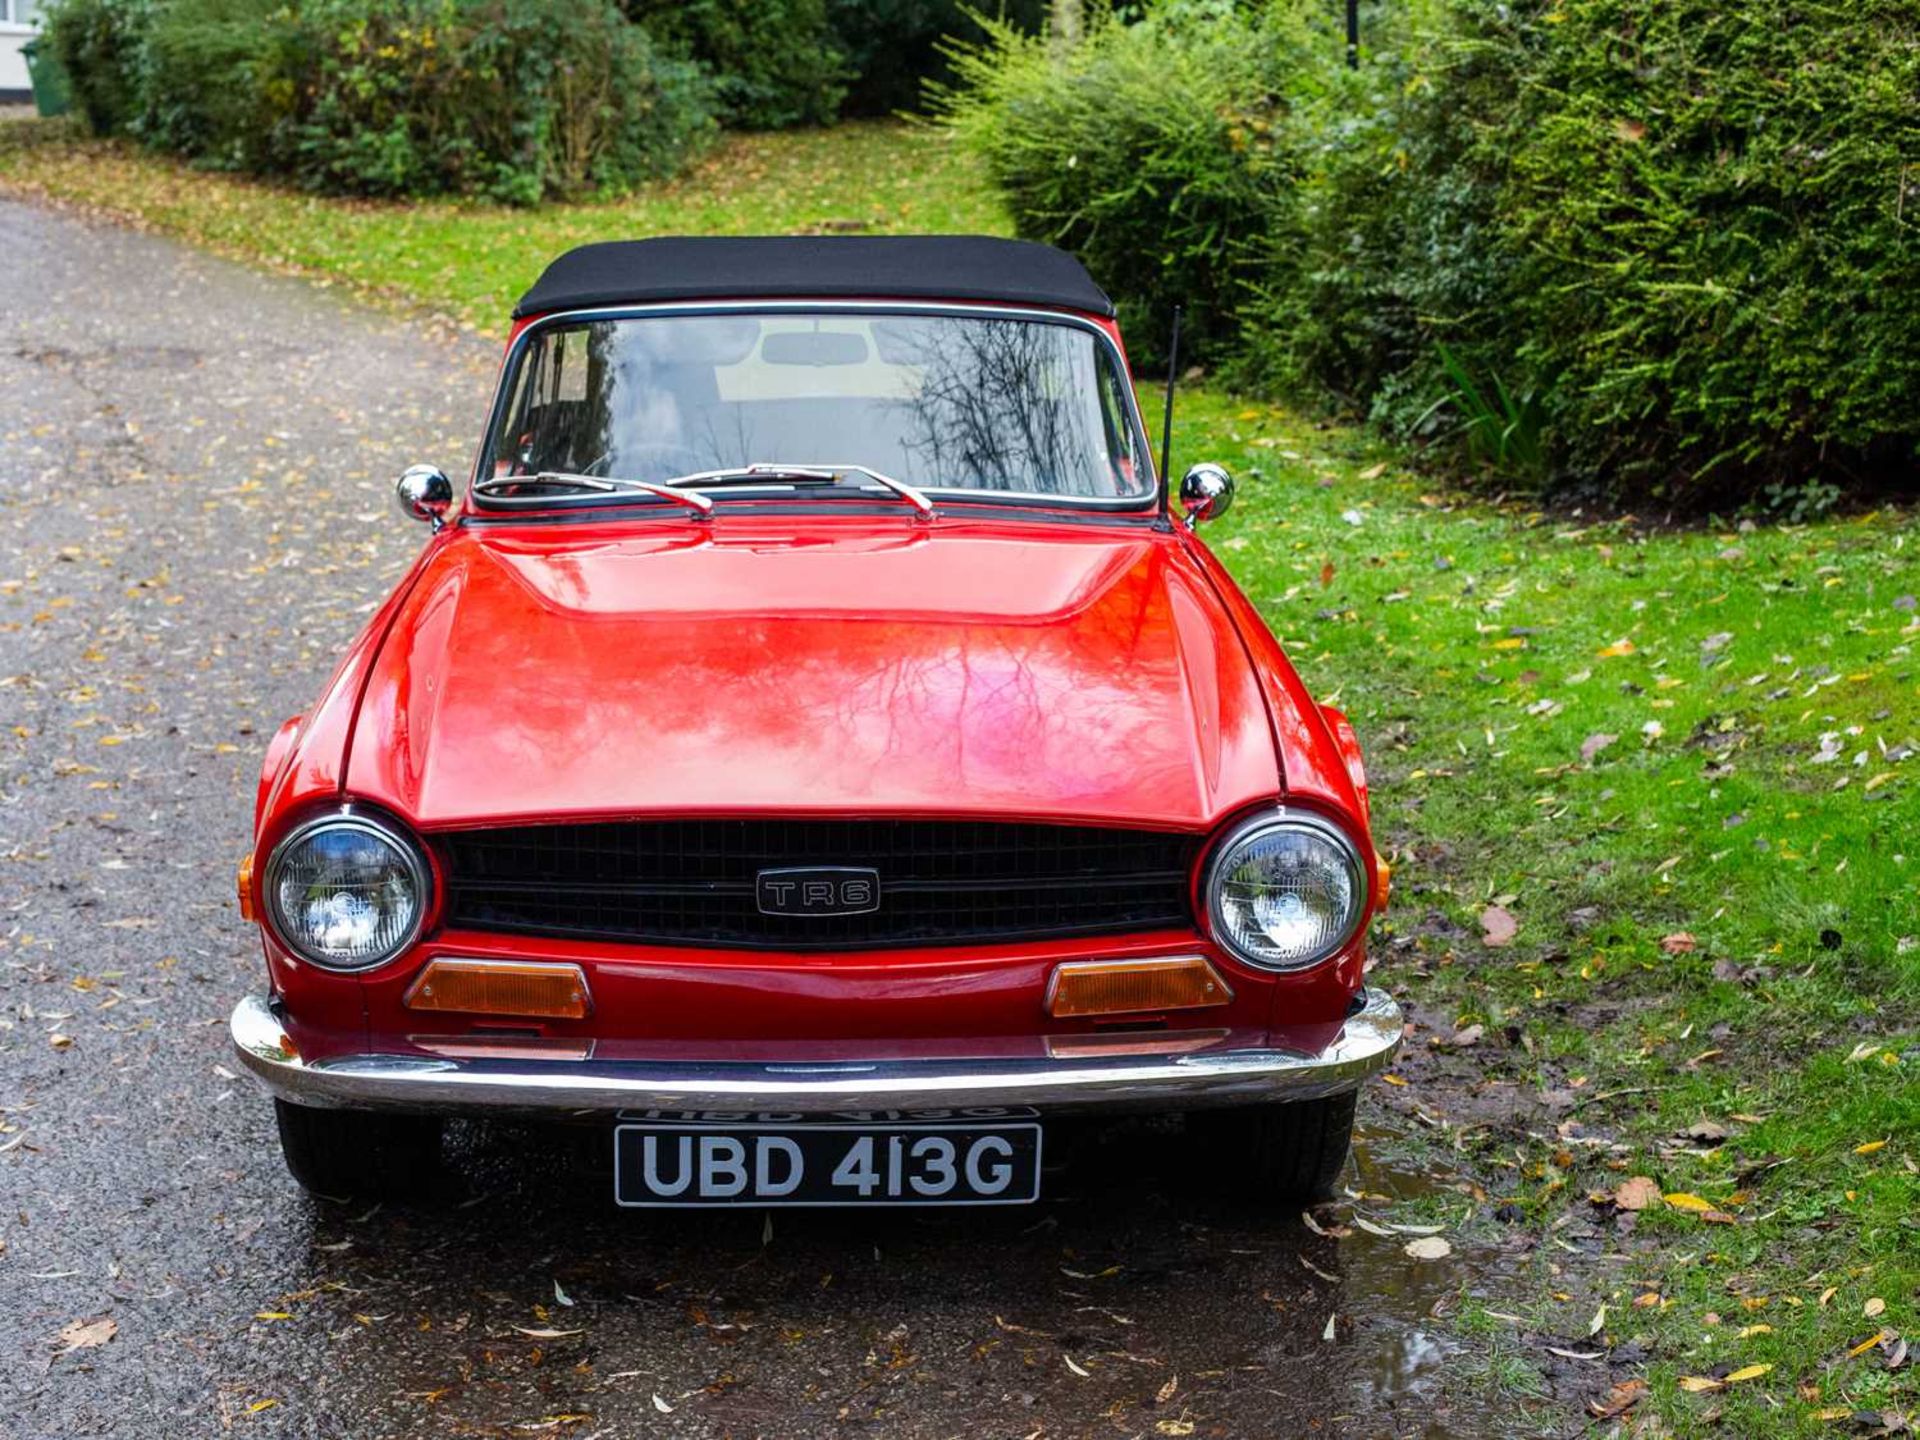 1969 Triumph TR6 Repatriated in 2020, converted to RHD and equipped with UK-specification SU carbure - Image 3 of 53